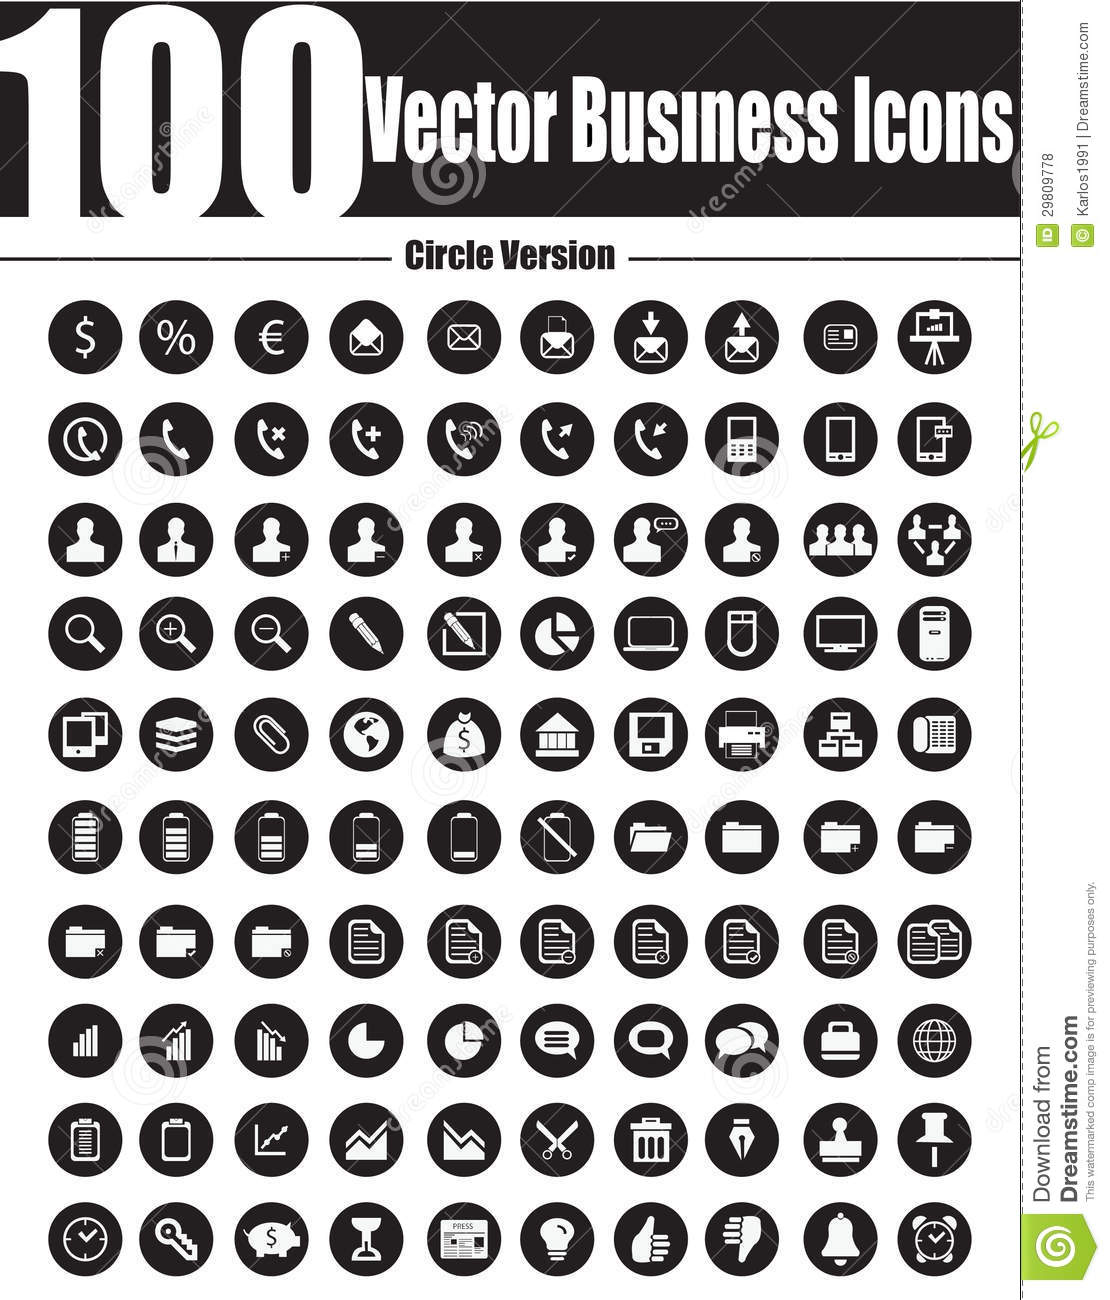 Resume Vector Icons